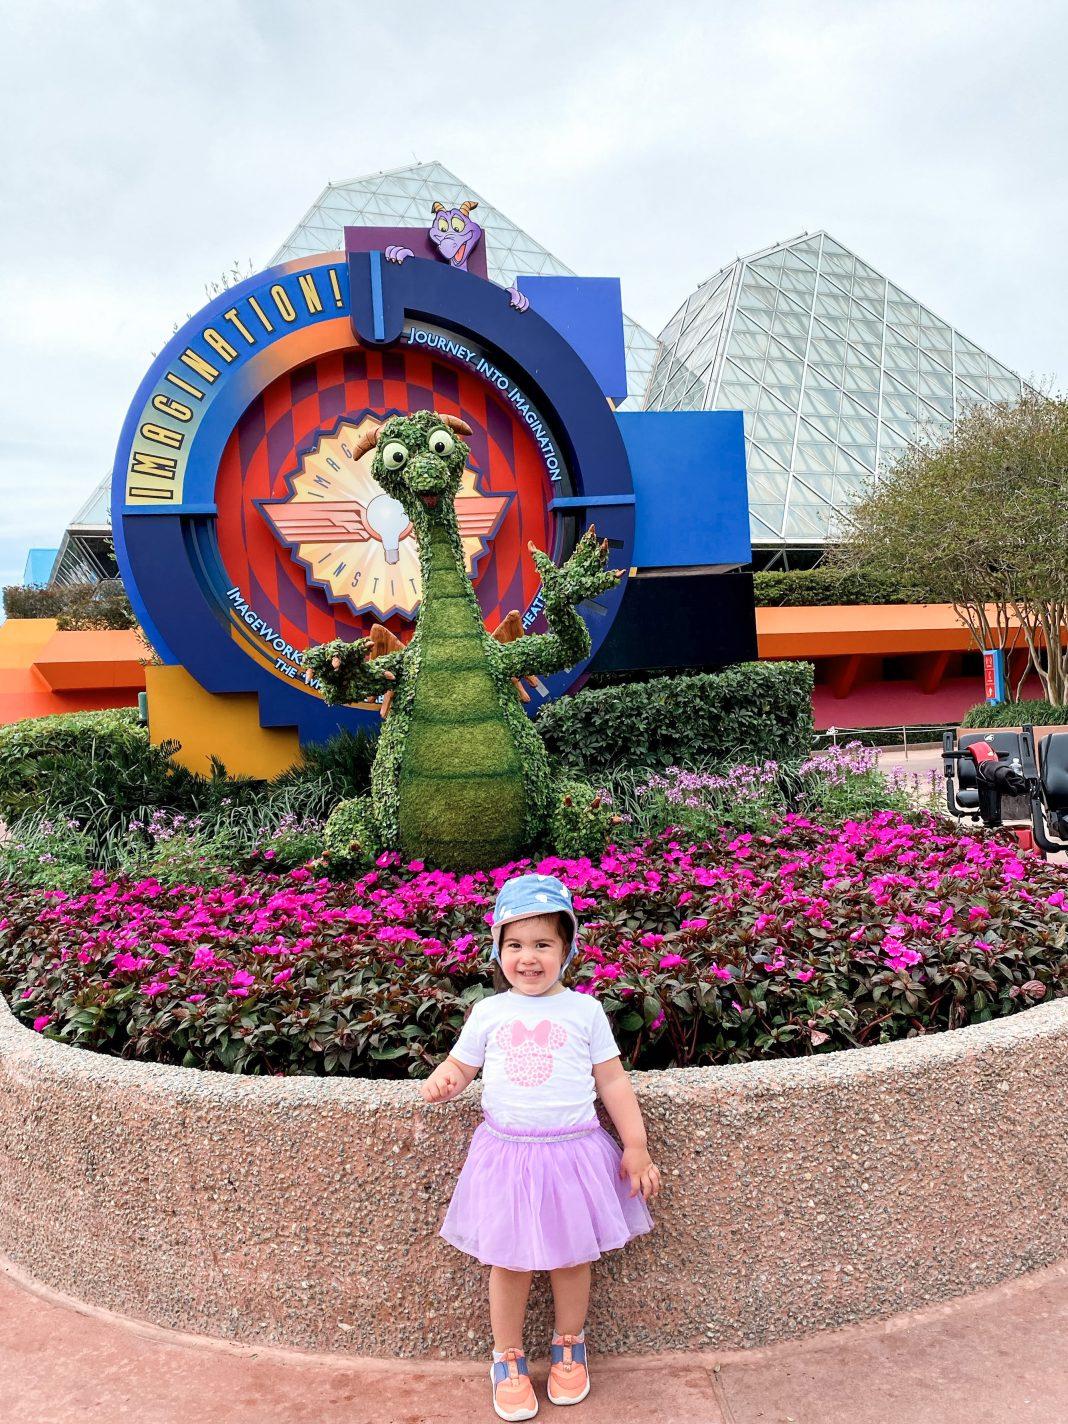 Toddler standing in front of Journey Into Imagination with Figment ride.